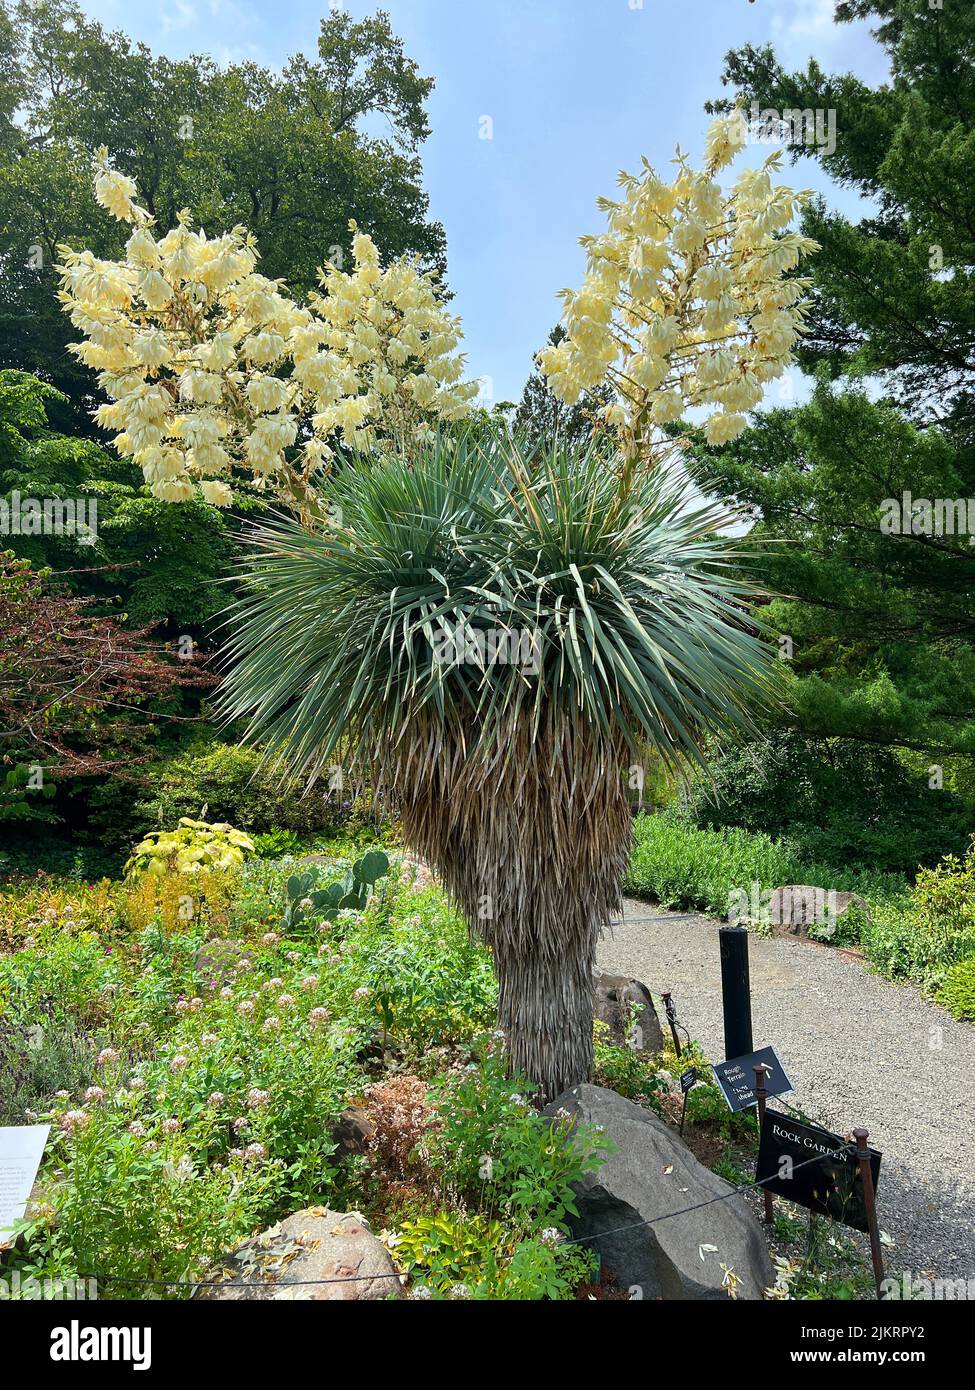 Yucca plant in full bloom at the Brooklyn Botanic Garden. Stock Photo